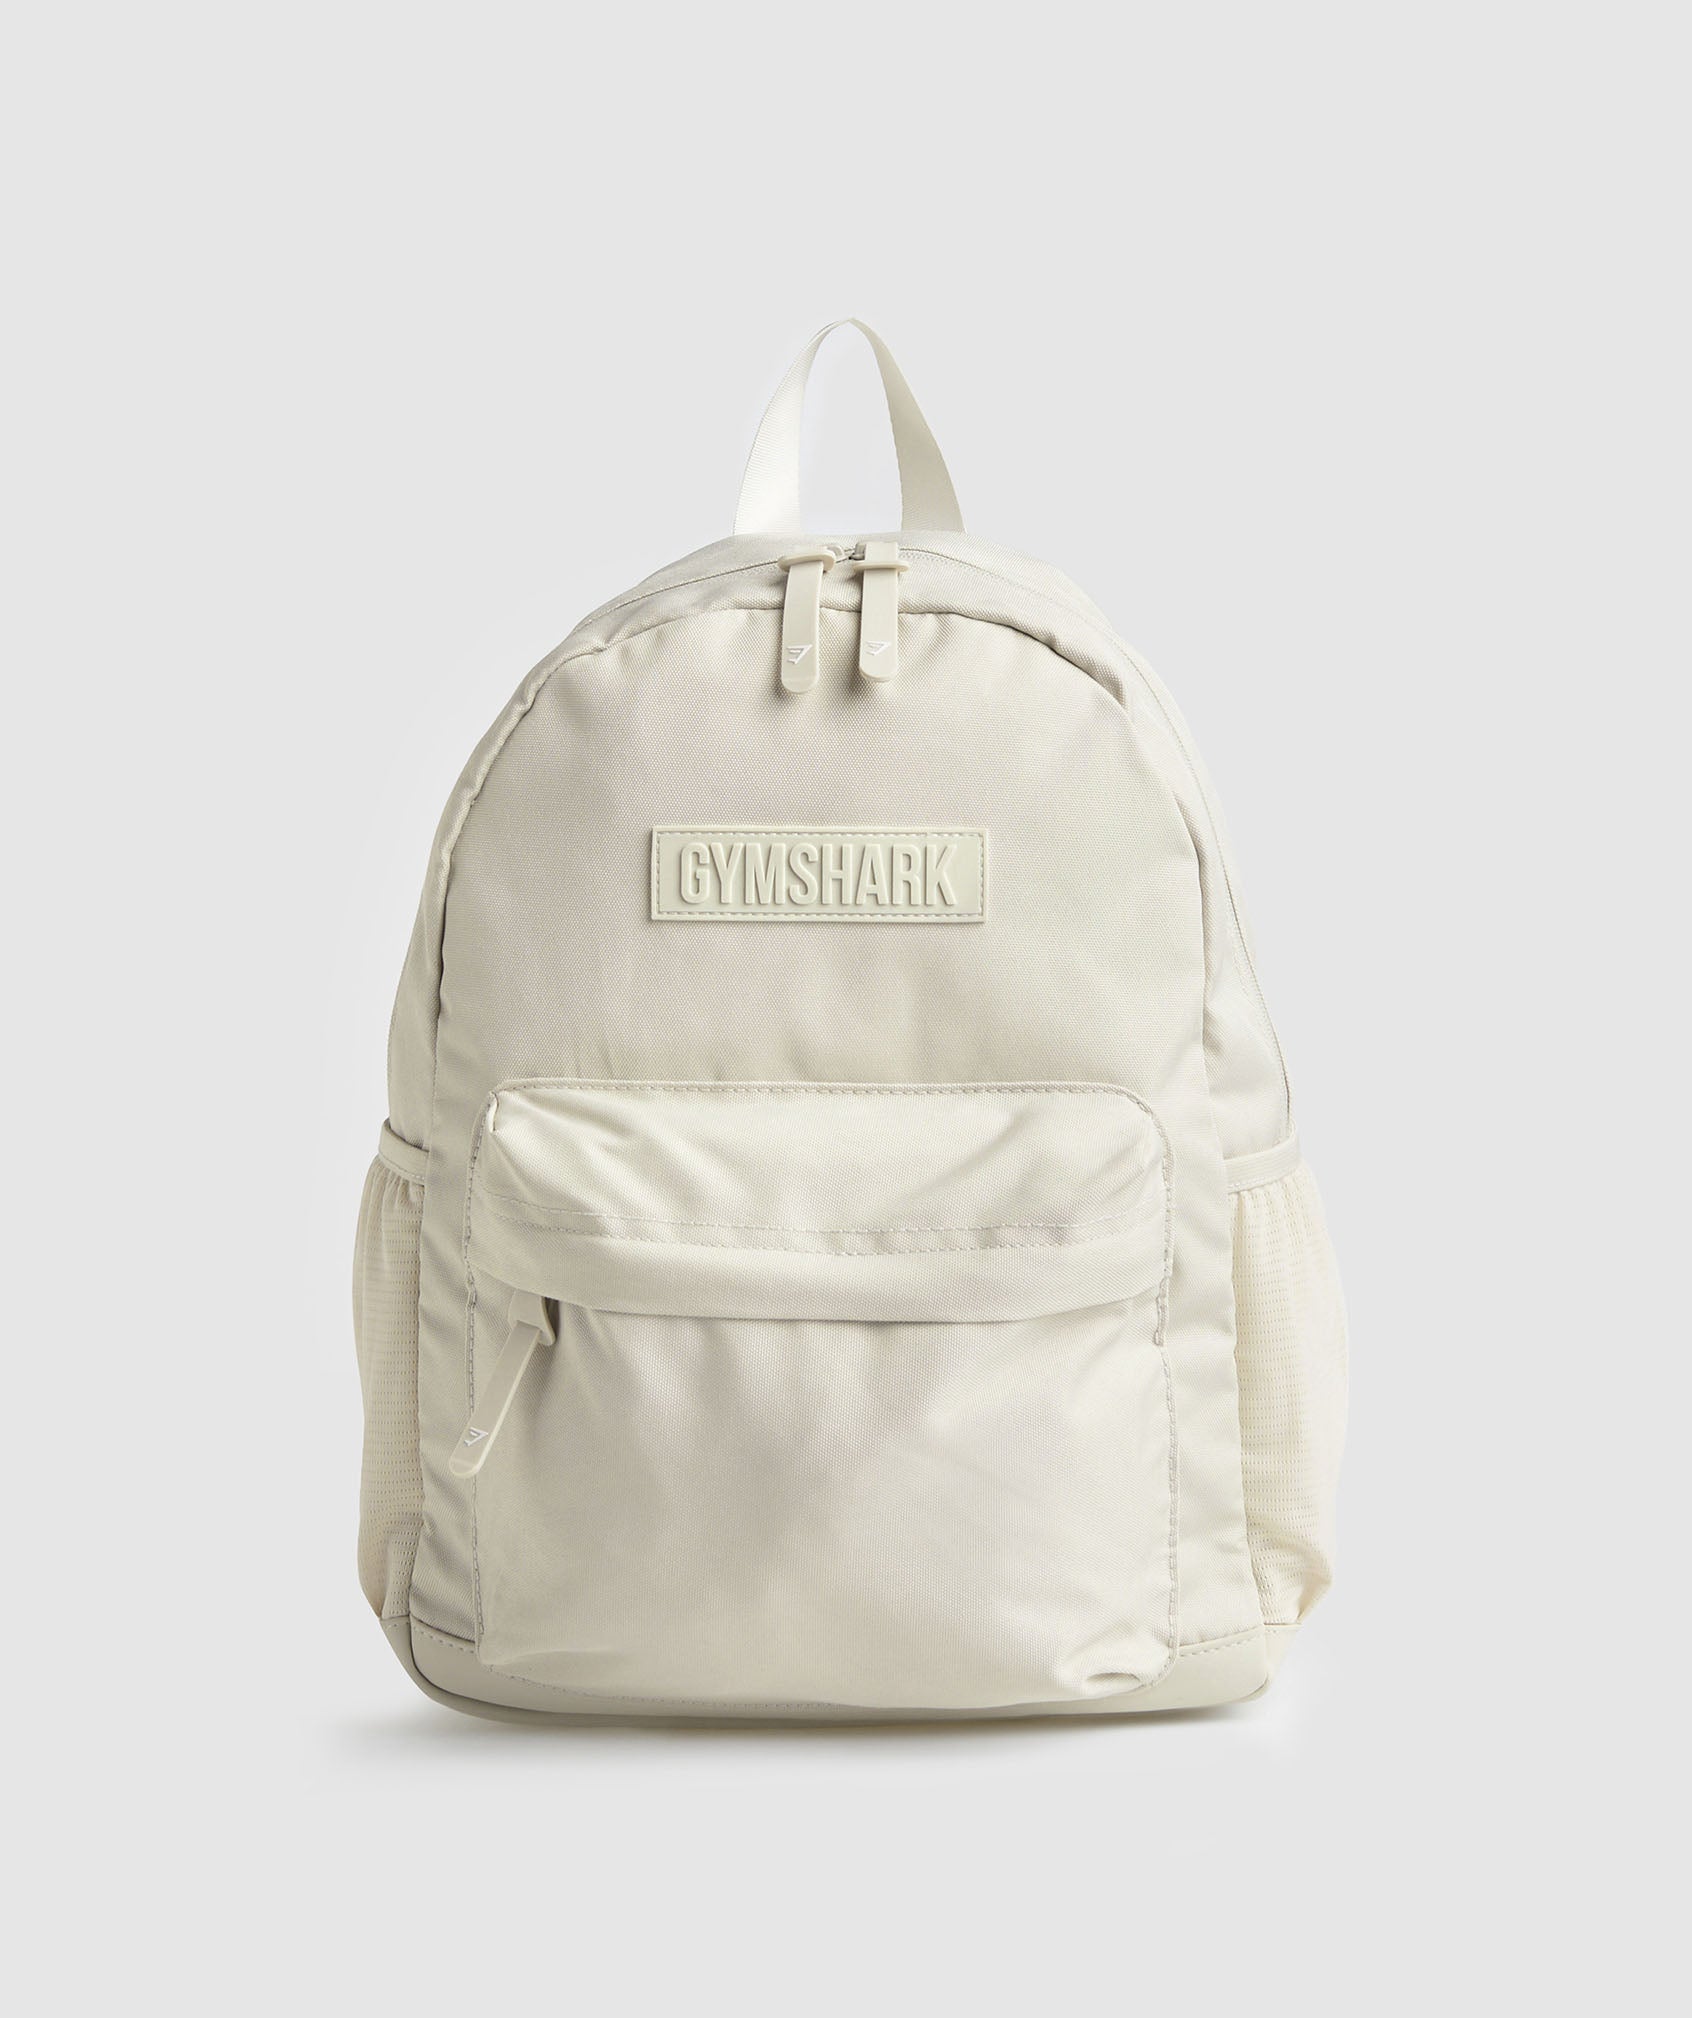 Everyday Backpack in Pebble Grey - view 1